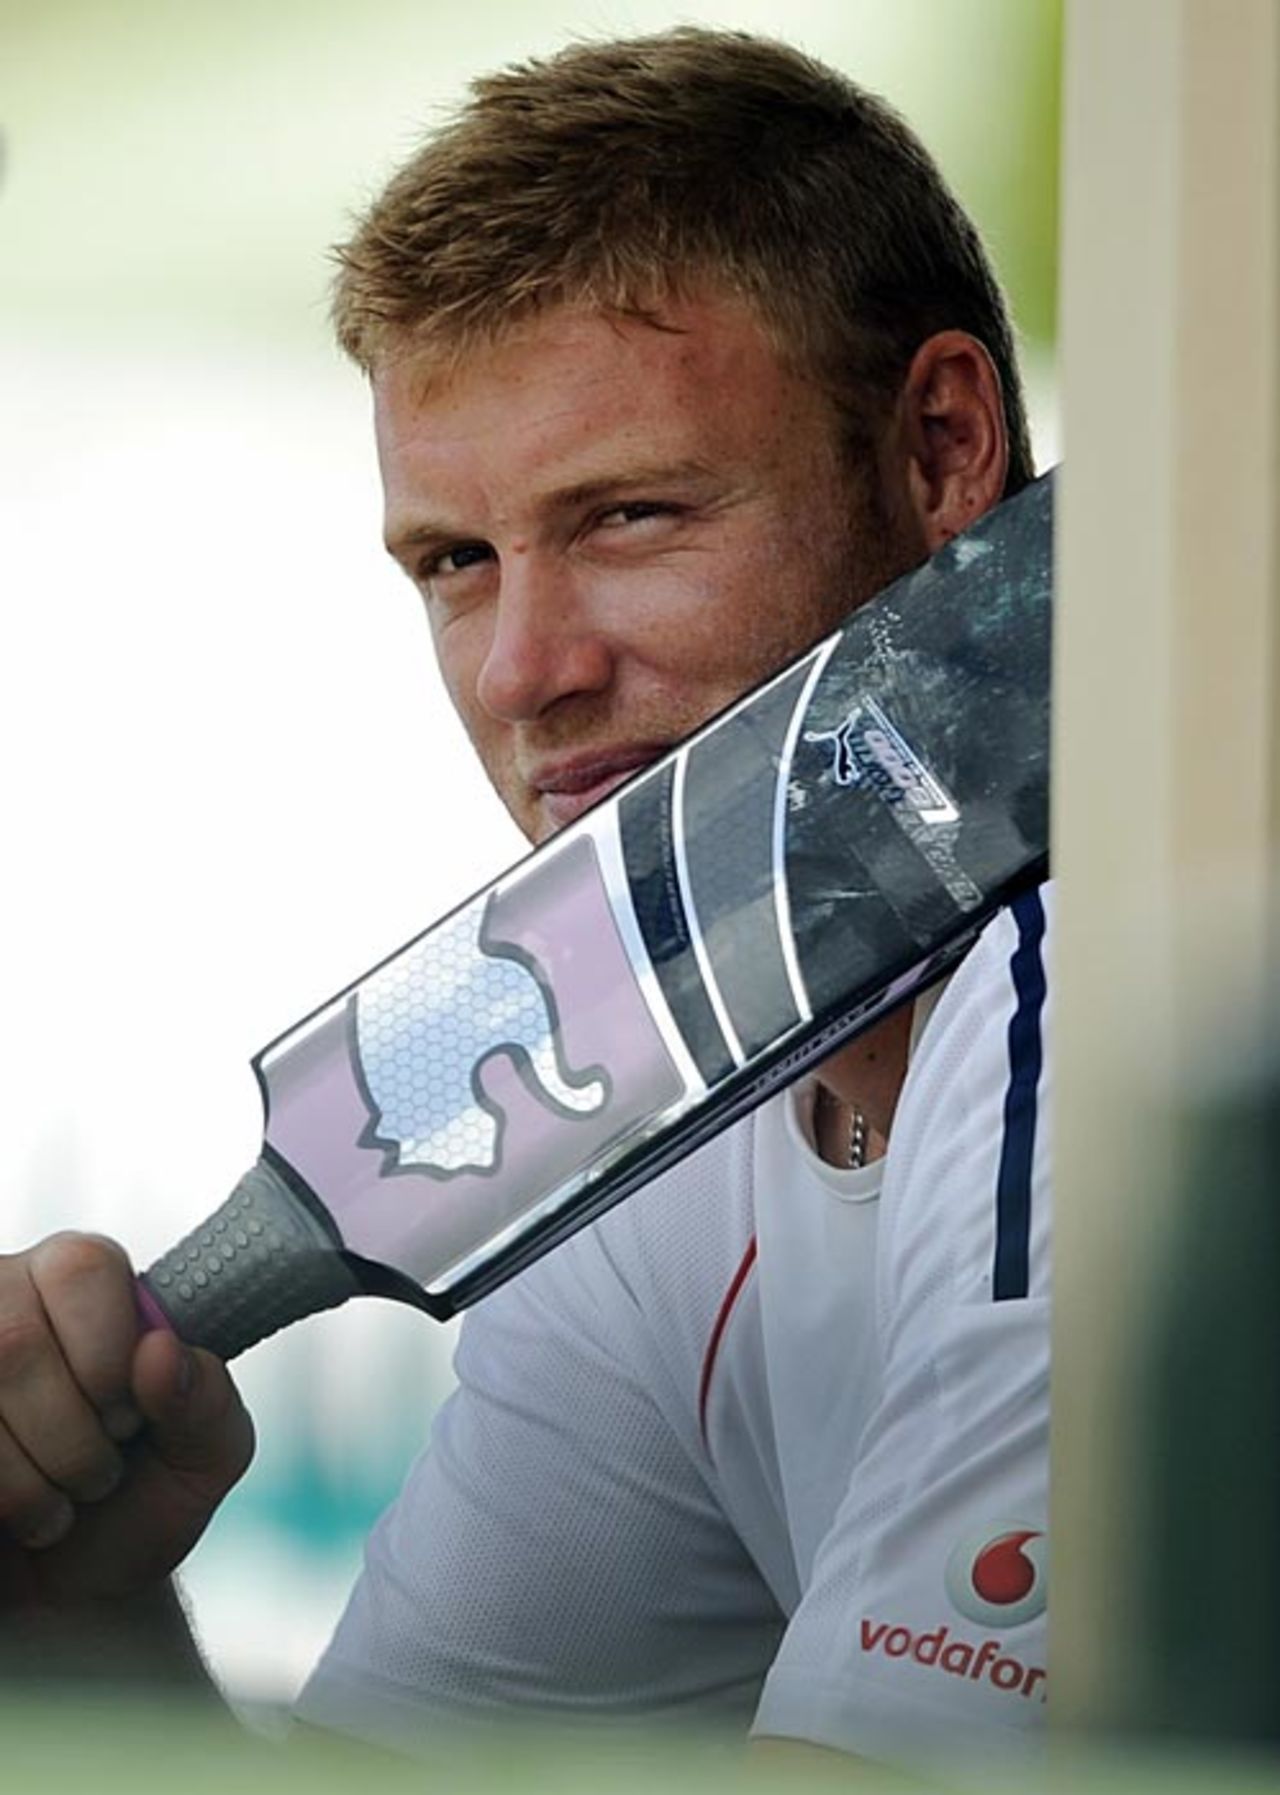 Andrew Flintoff poses with the special bat to be used for the match, Stanford 20/20 for 20, Antigua, October 31, 2008